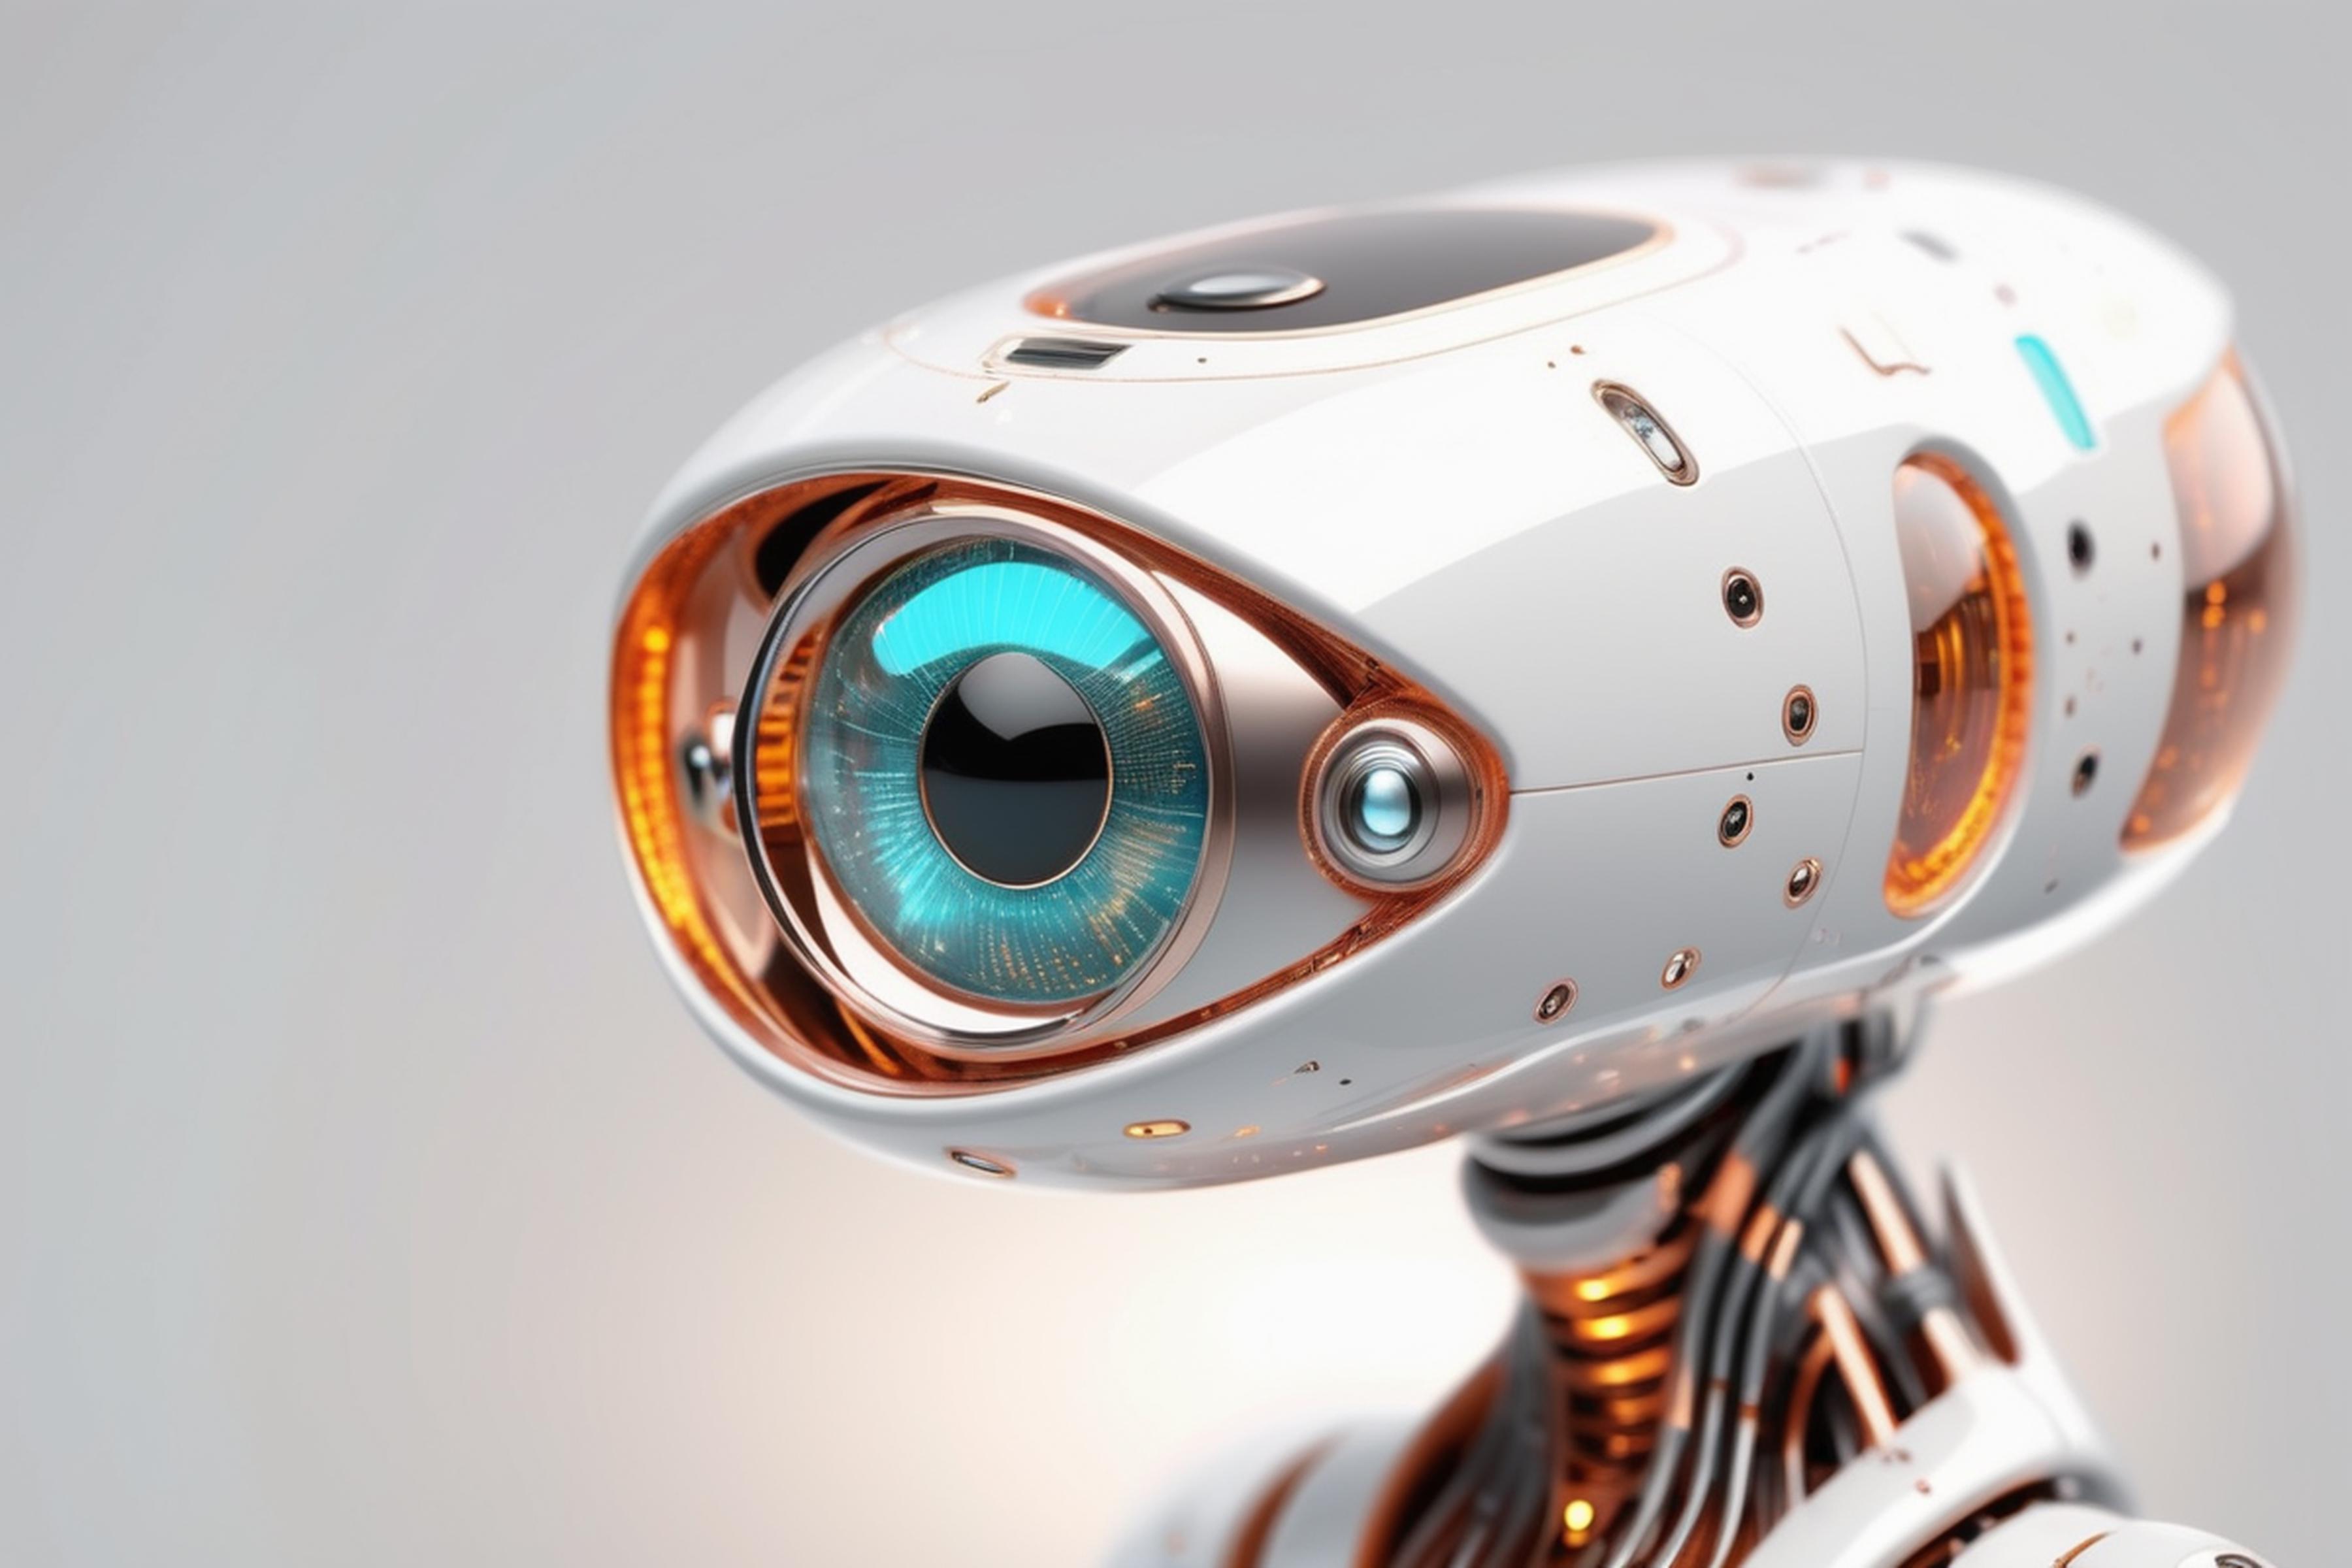 An Eye-Shaped Robotic Head with Blue and Orange Lights.